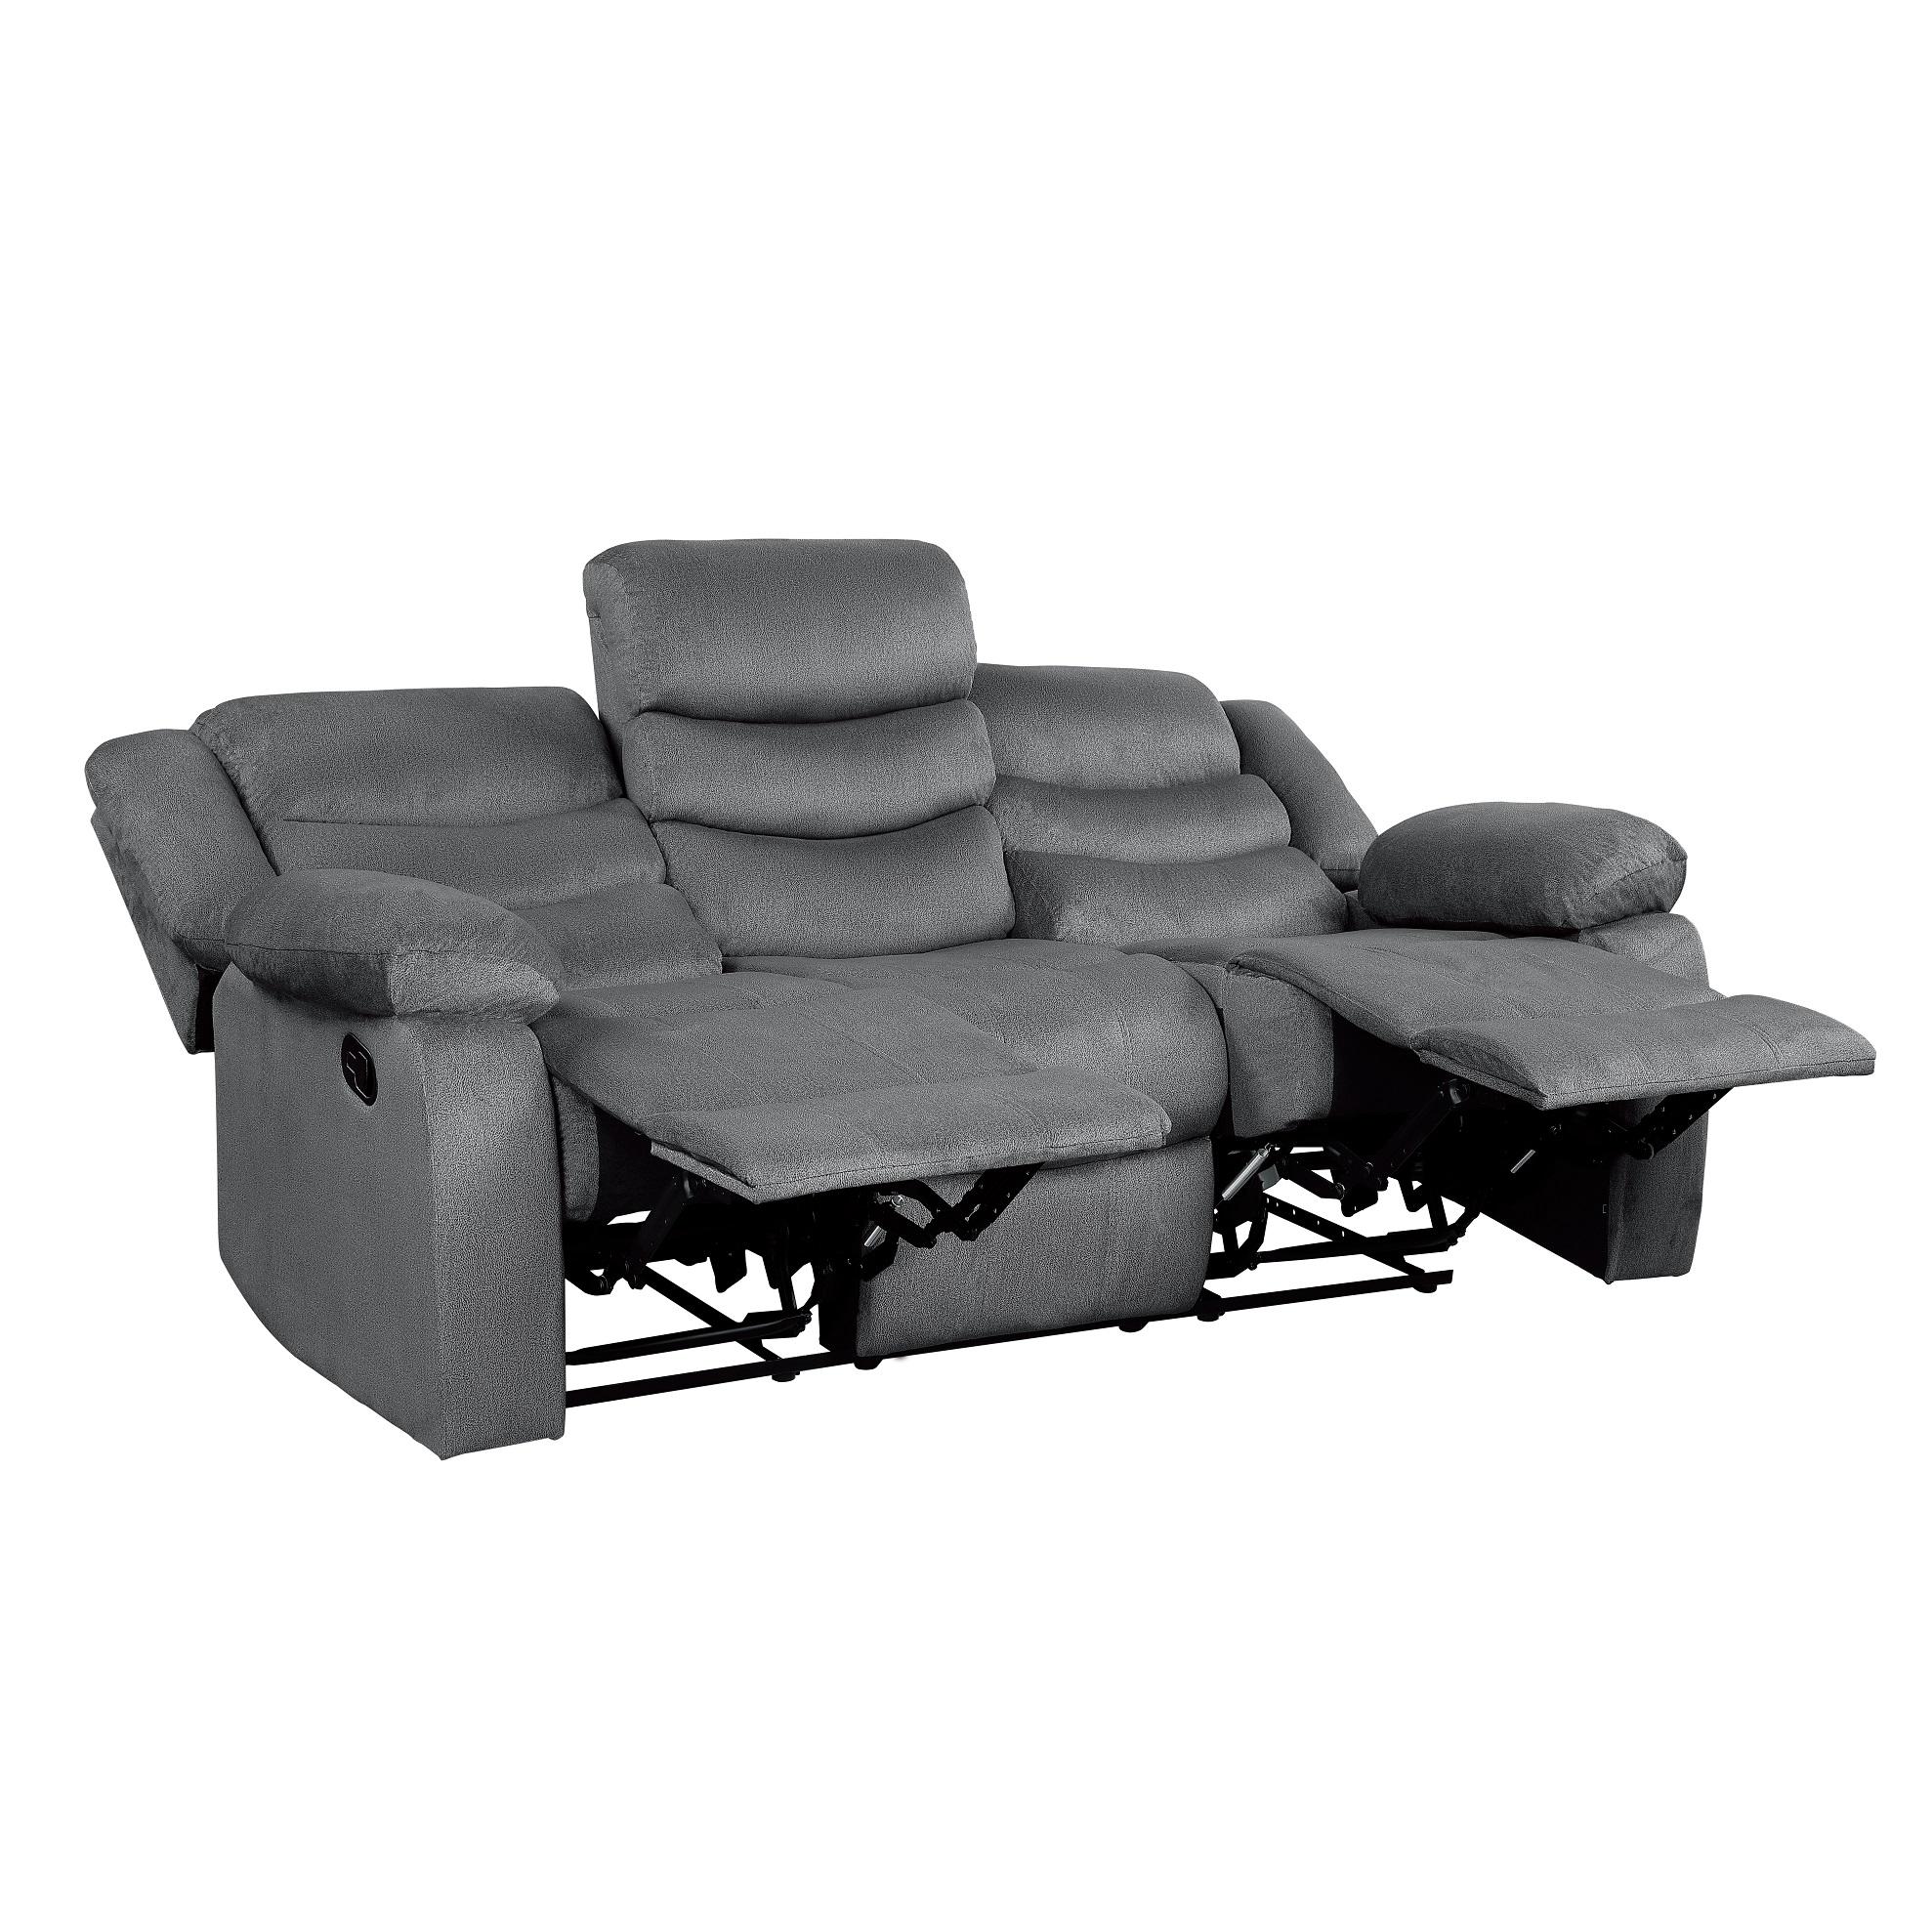 

    
Homelegance 9526GY-3 Discus Reclining Sofa Gray 9526GY-3
